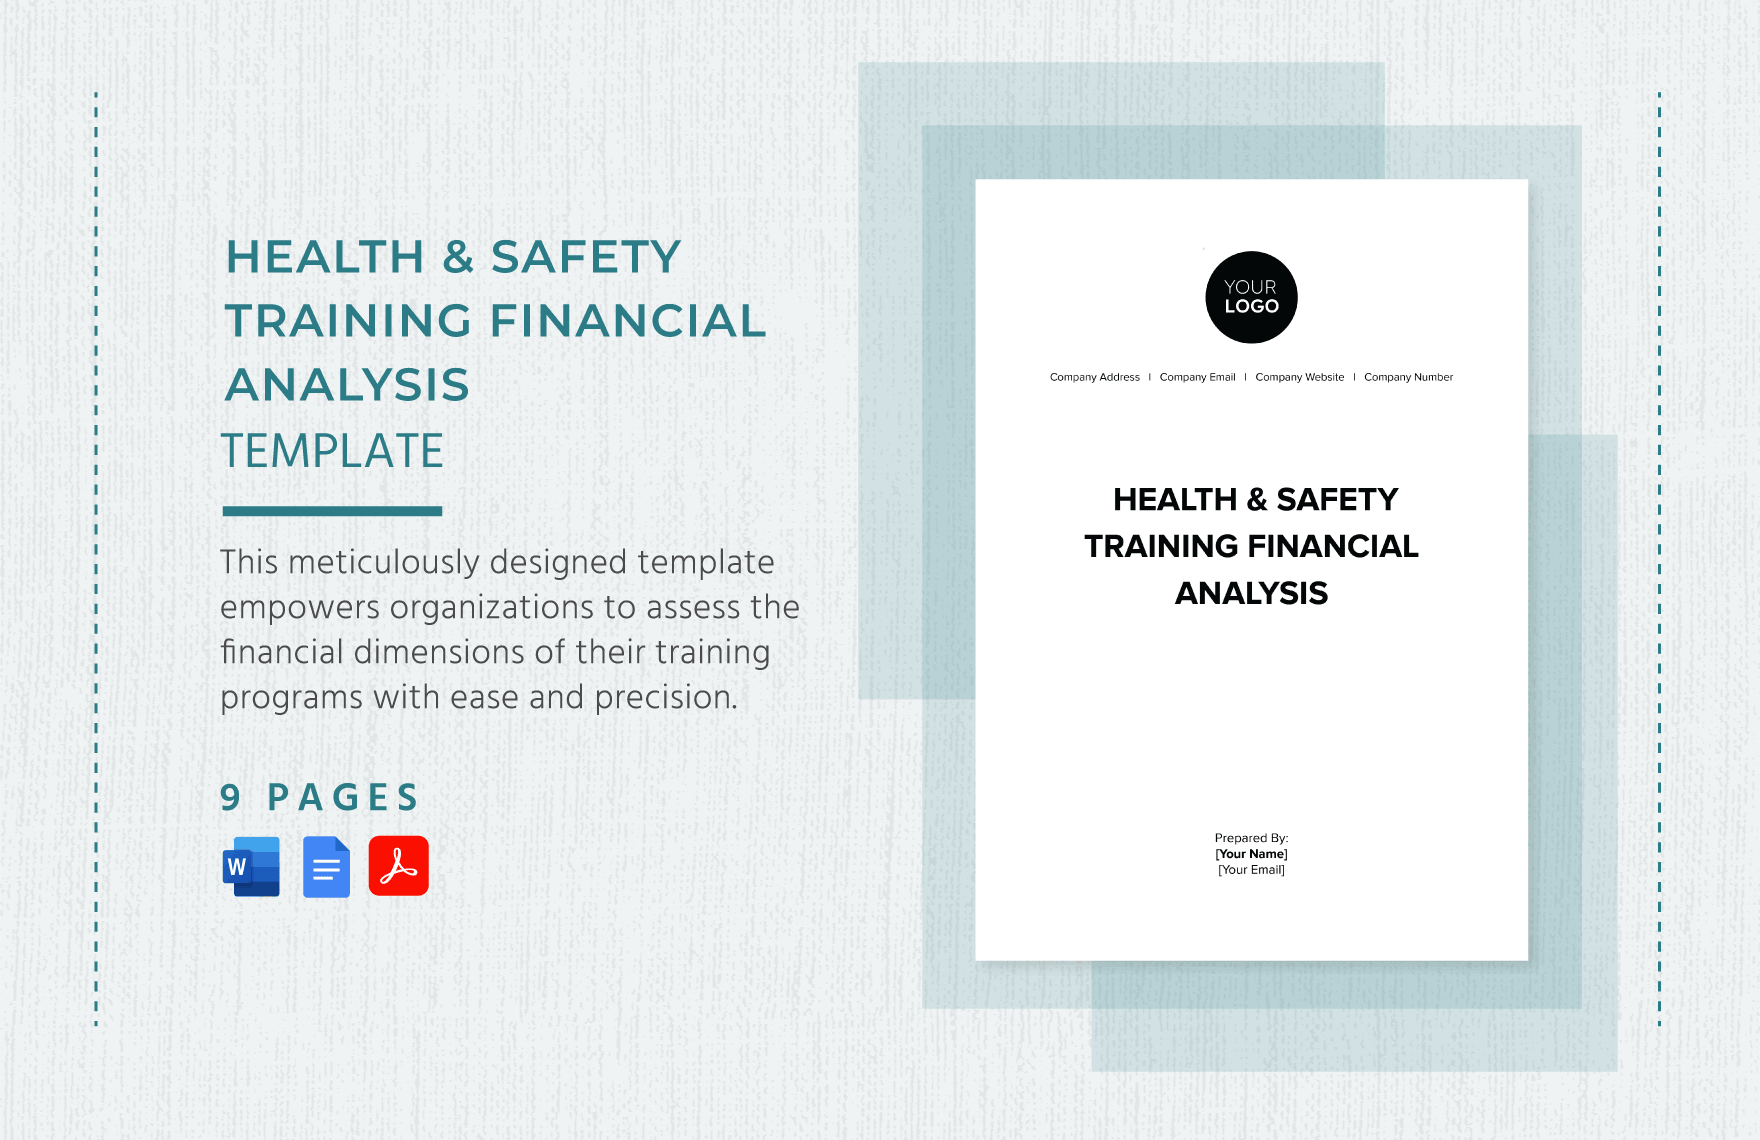 Health & Safety Training Financial Analysis Template